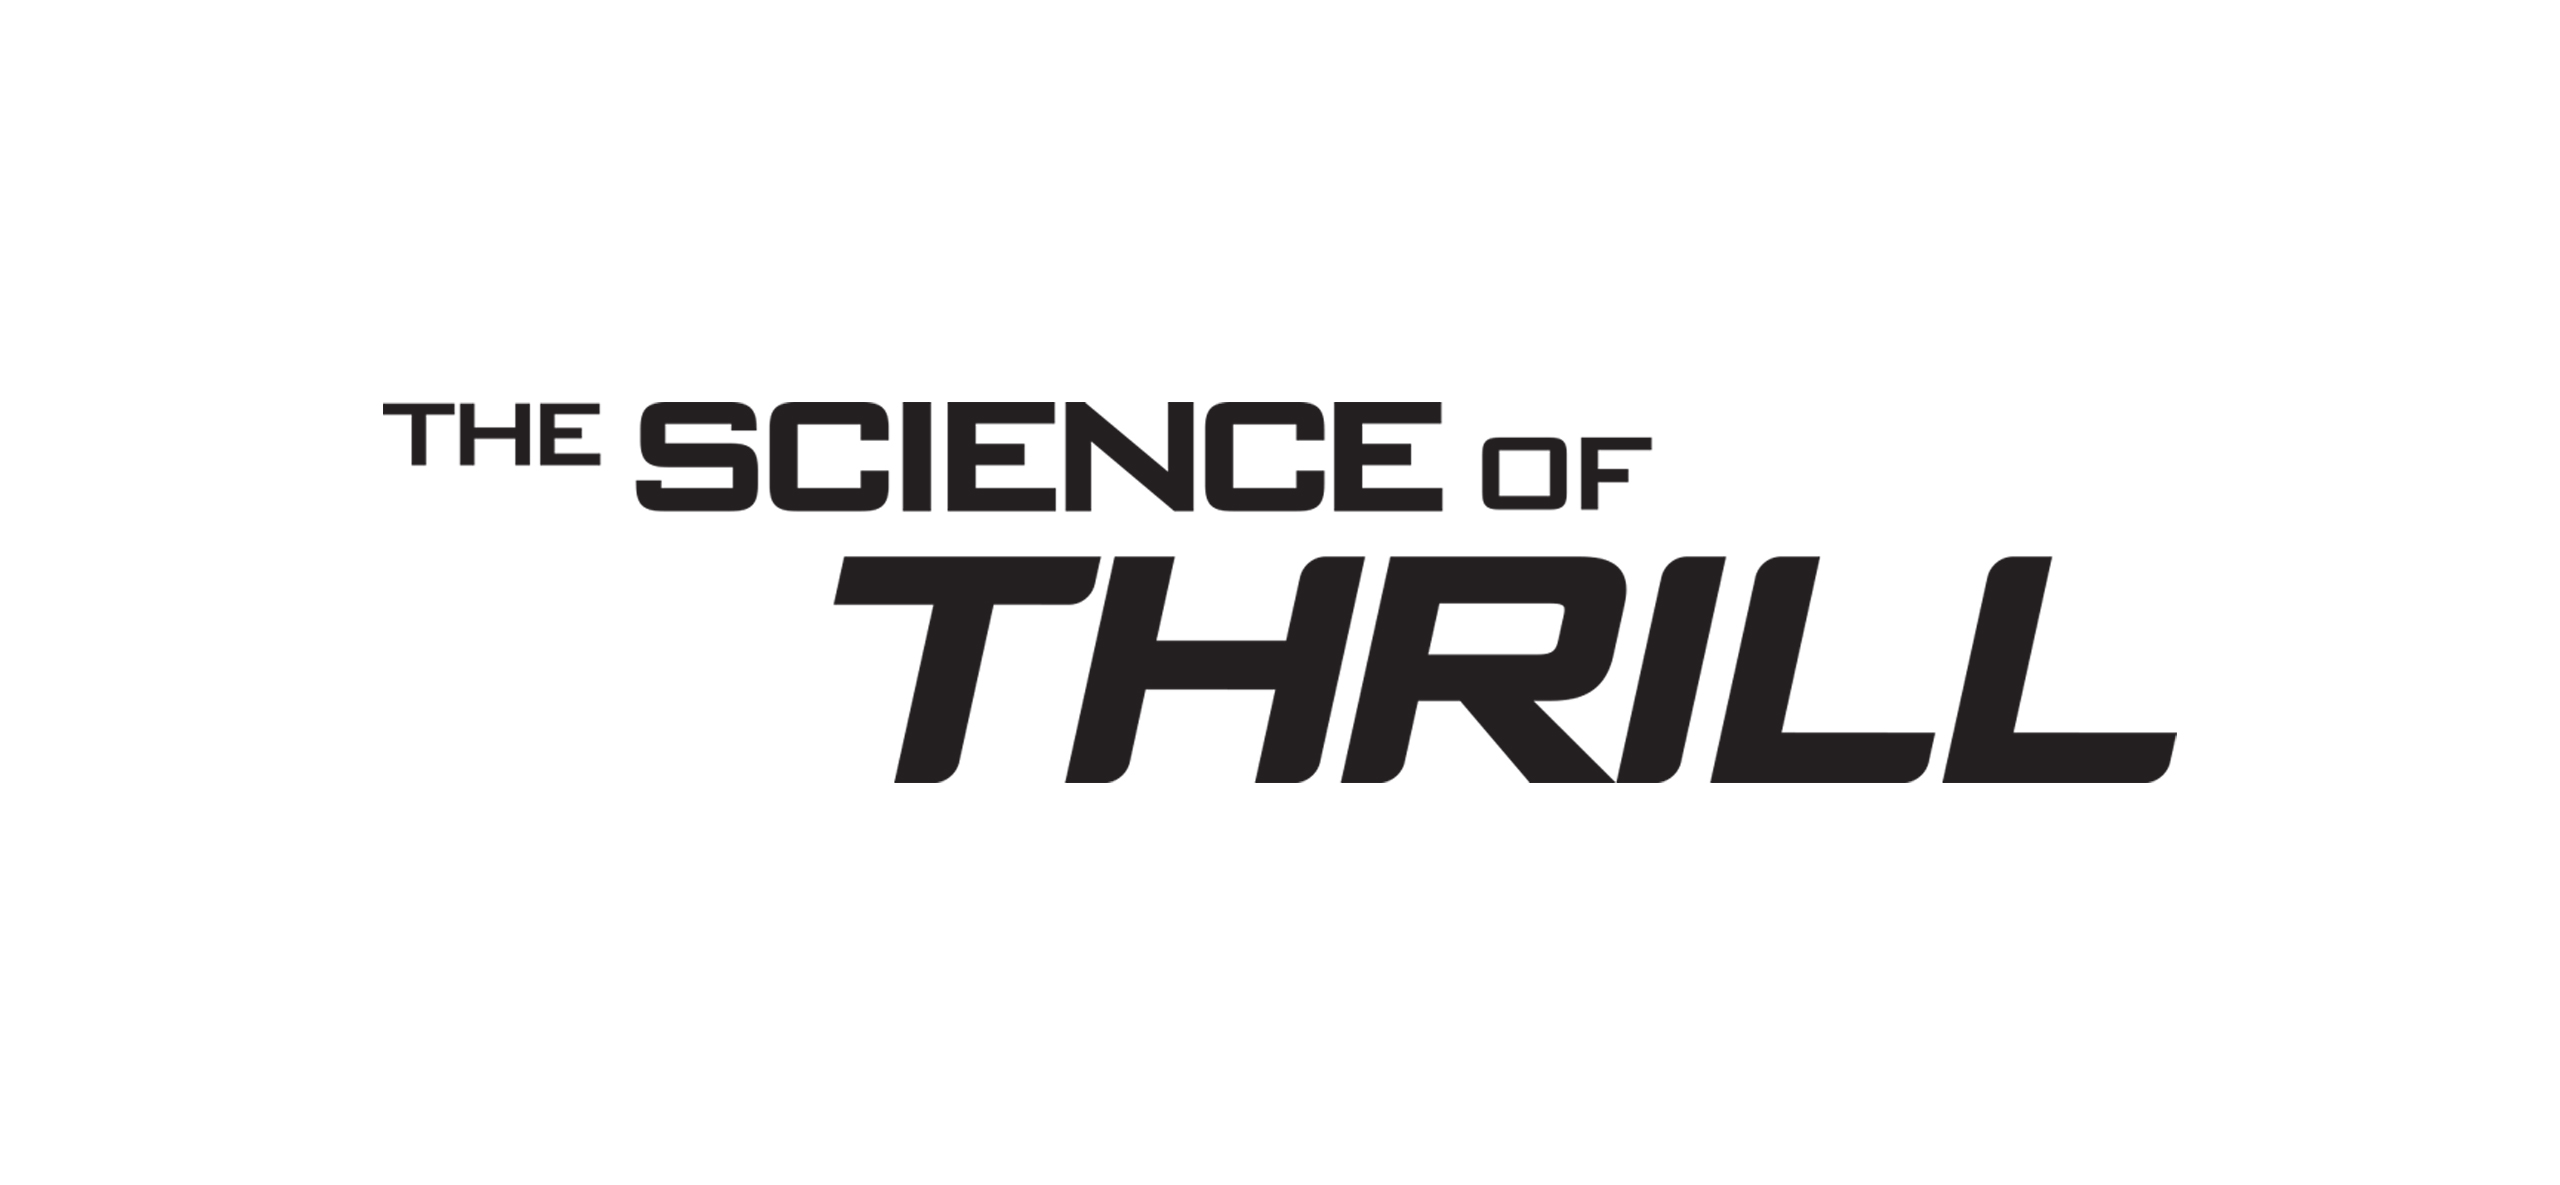 The Science of Thrill TV series logo